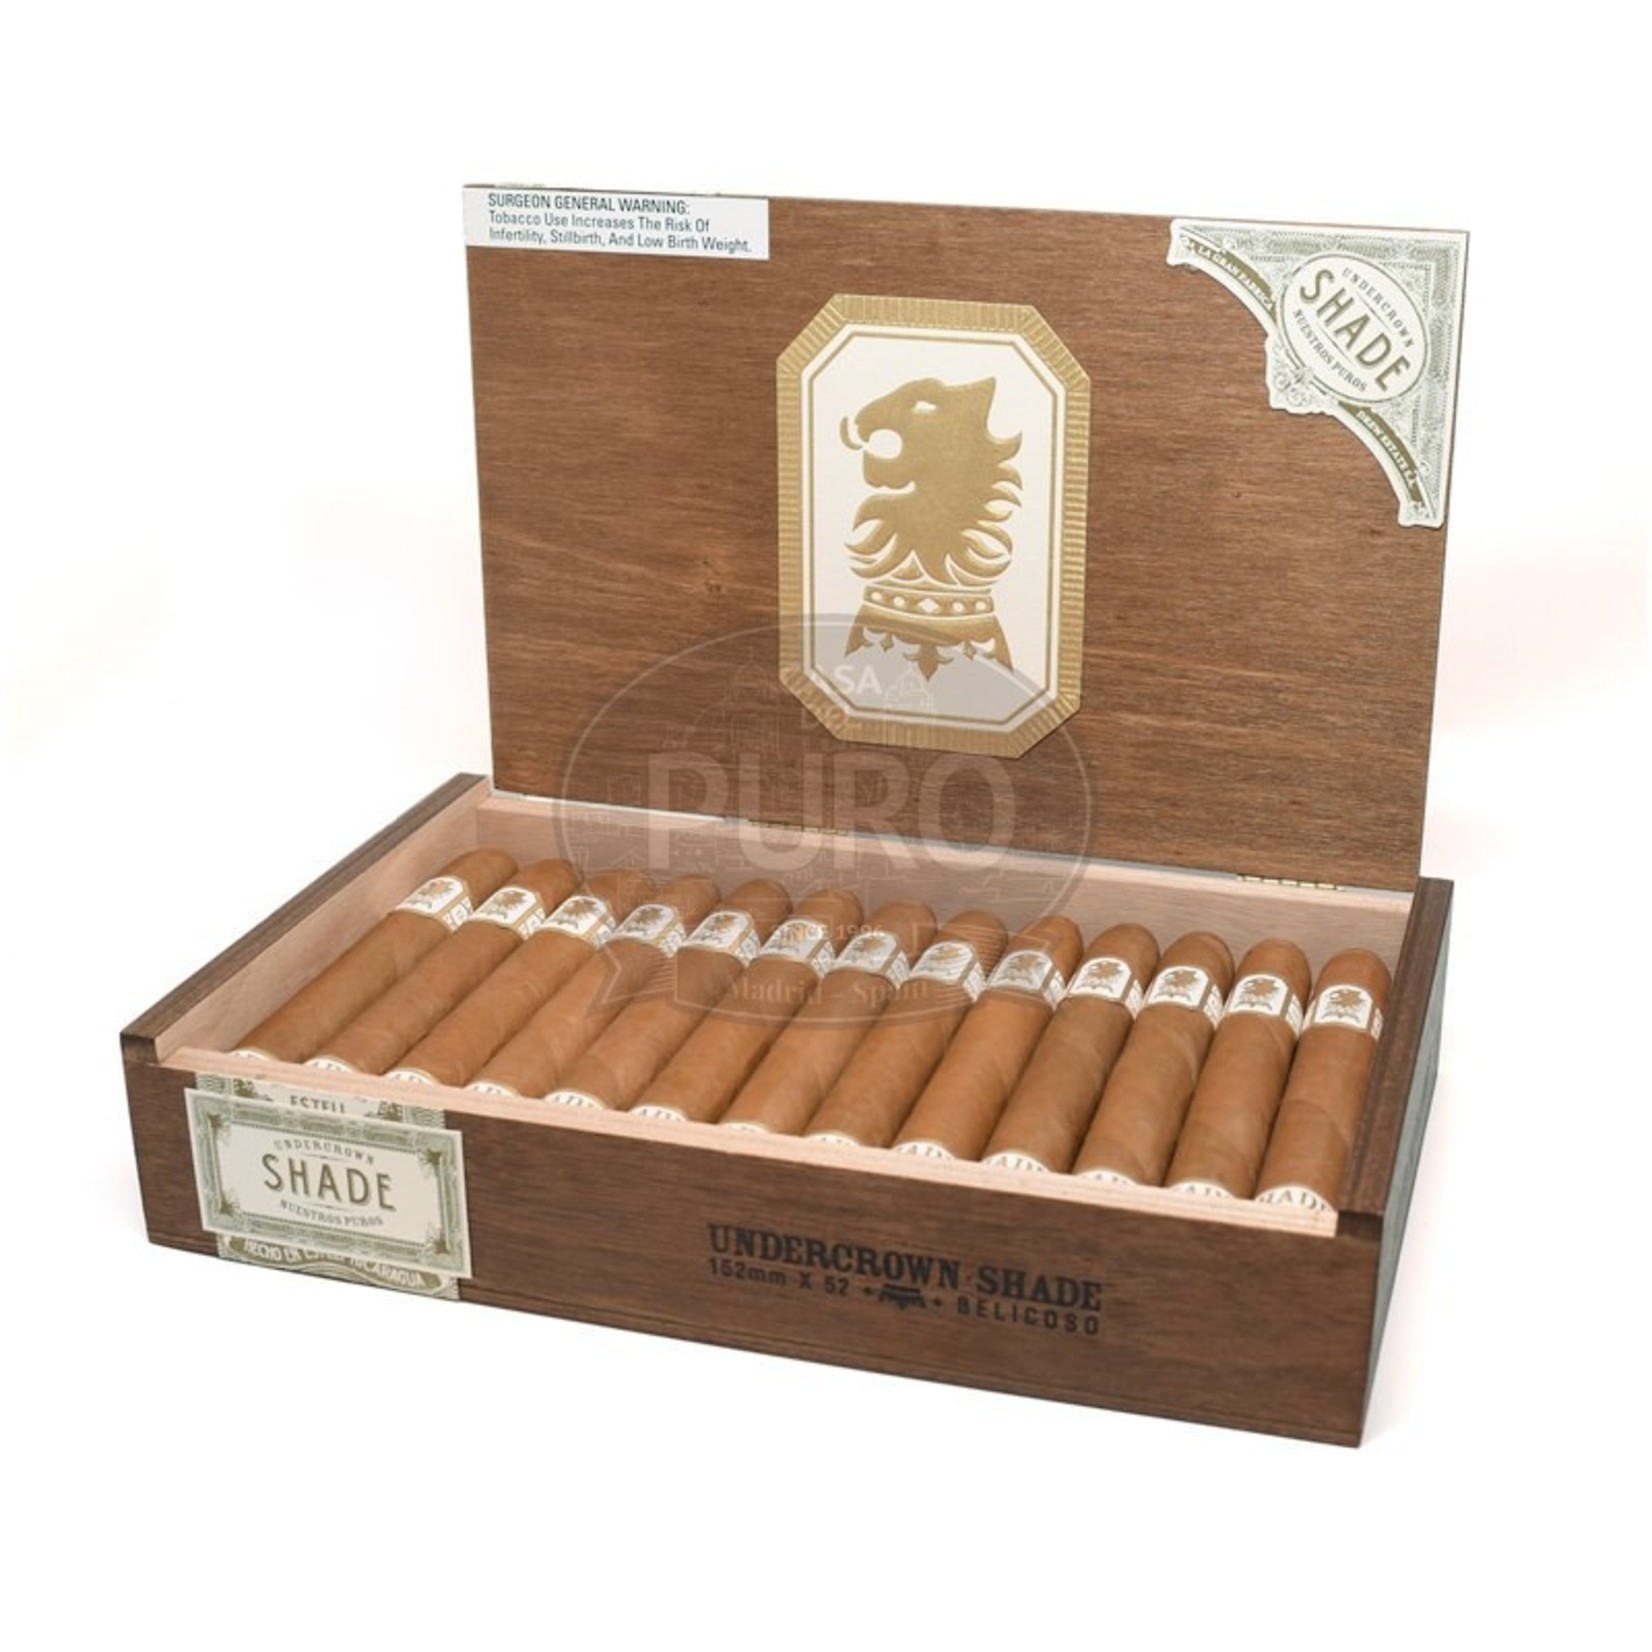 Undercrown undercrown shade belicoso